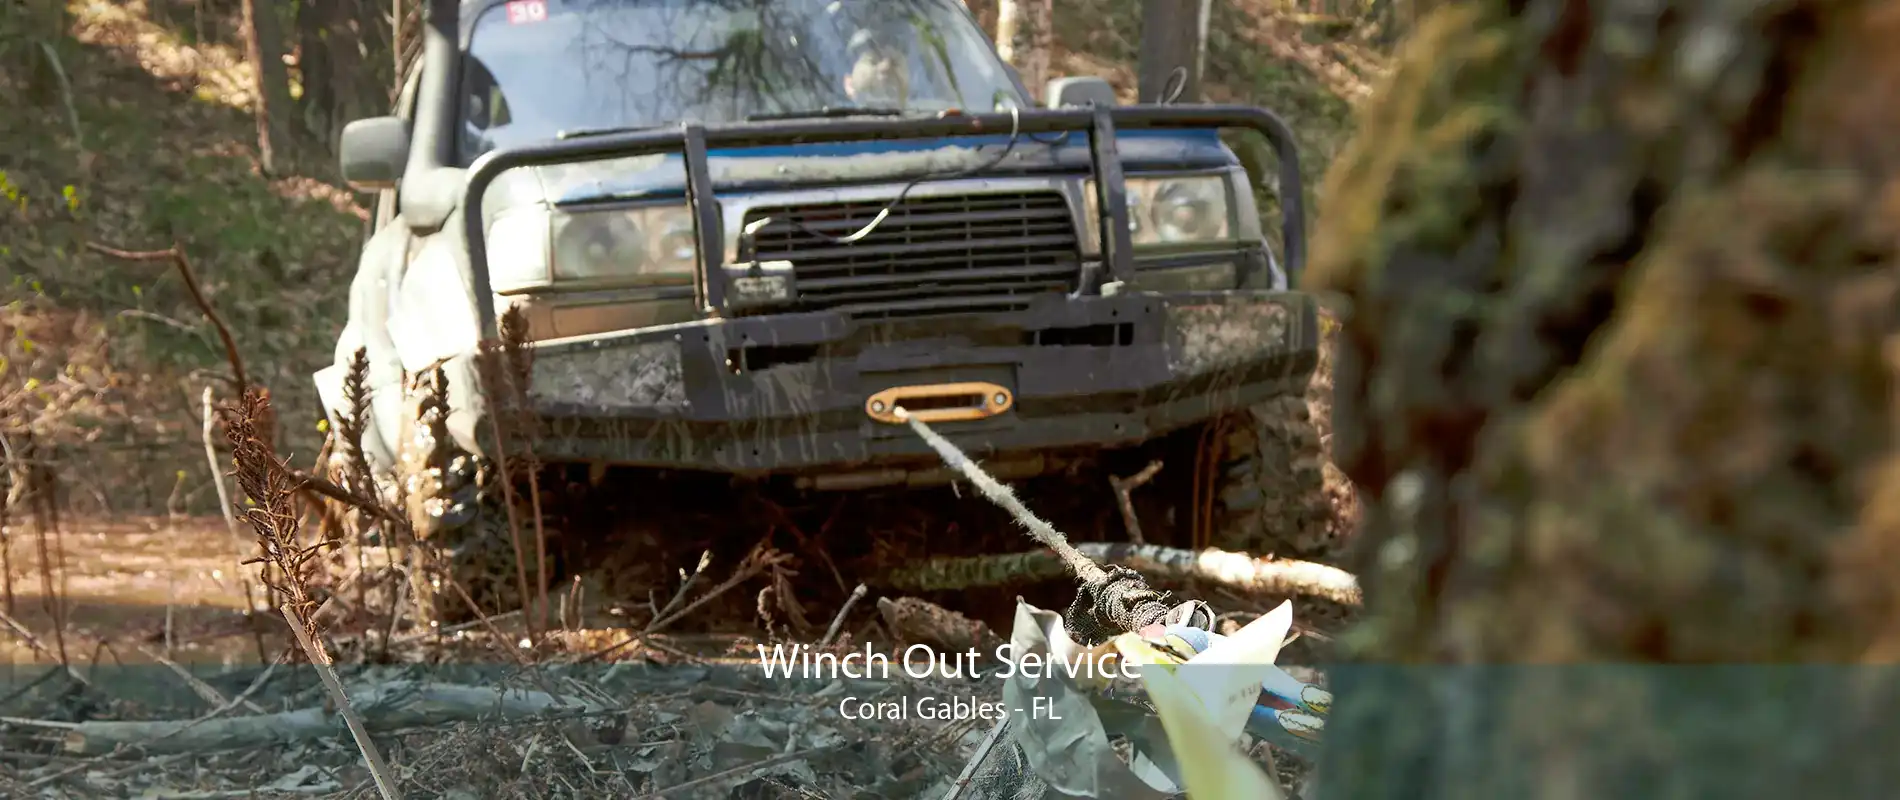 Winch Out Service Coral Gables - FL